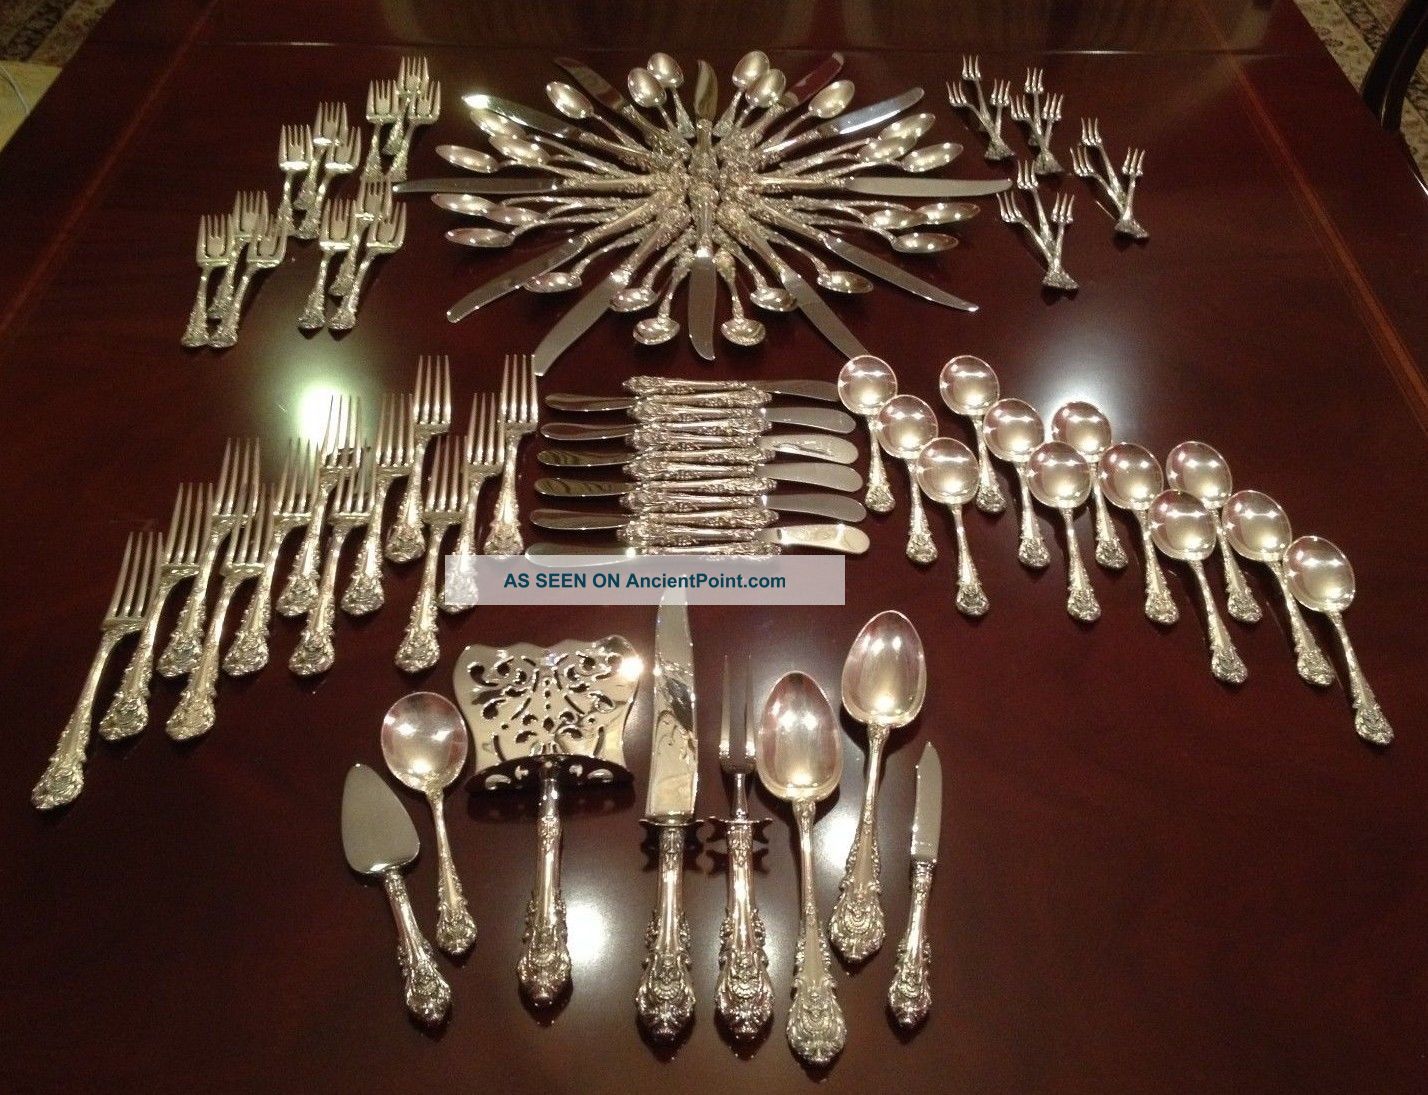 Wallace Sir Christopher 104 Piece Set Sterling Silver Flatware Service For 12 Flatware & Silverware photo